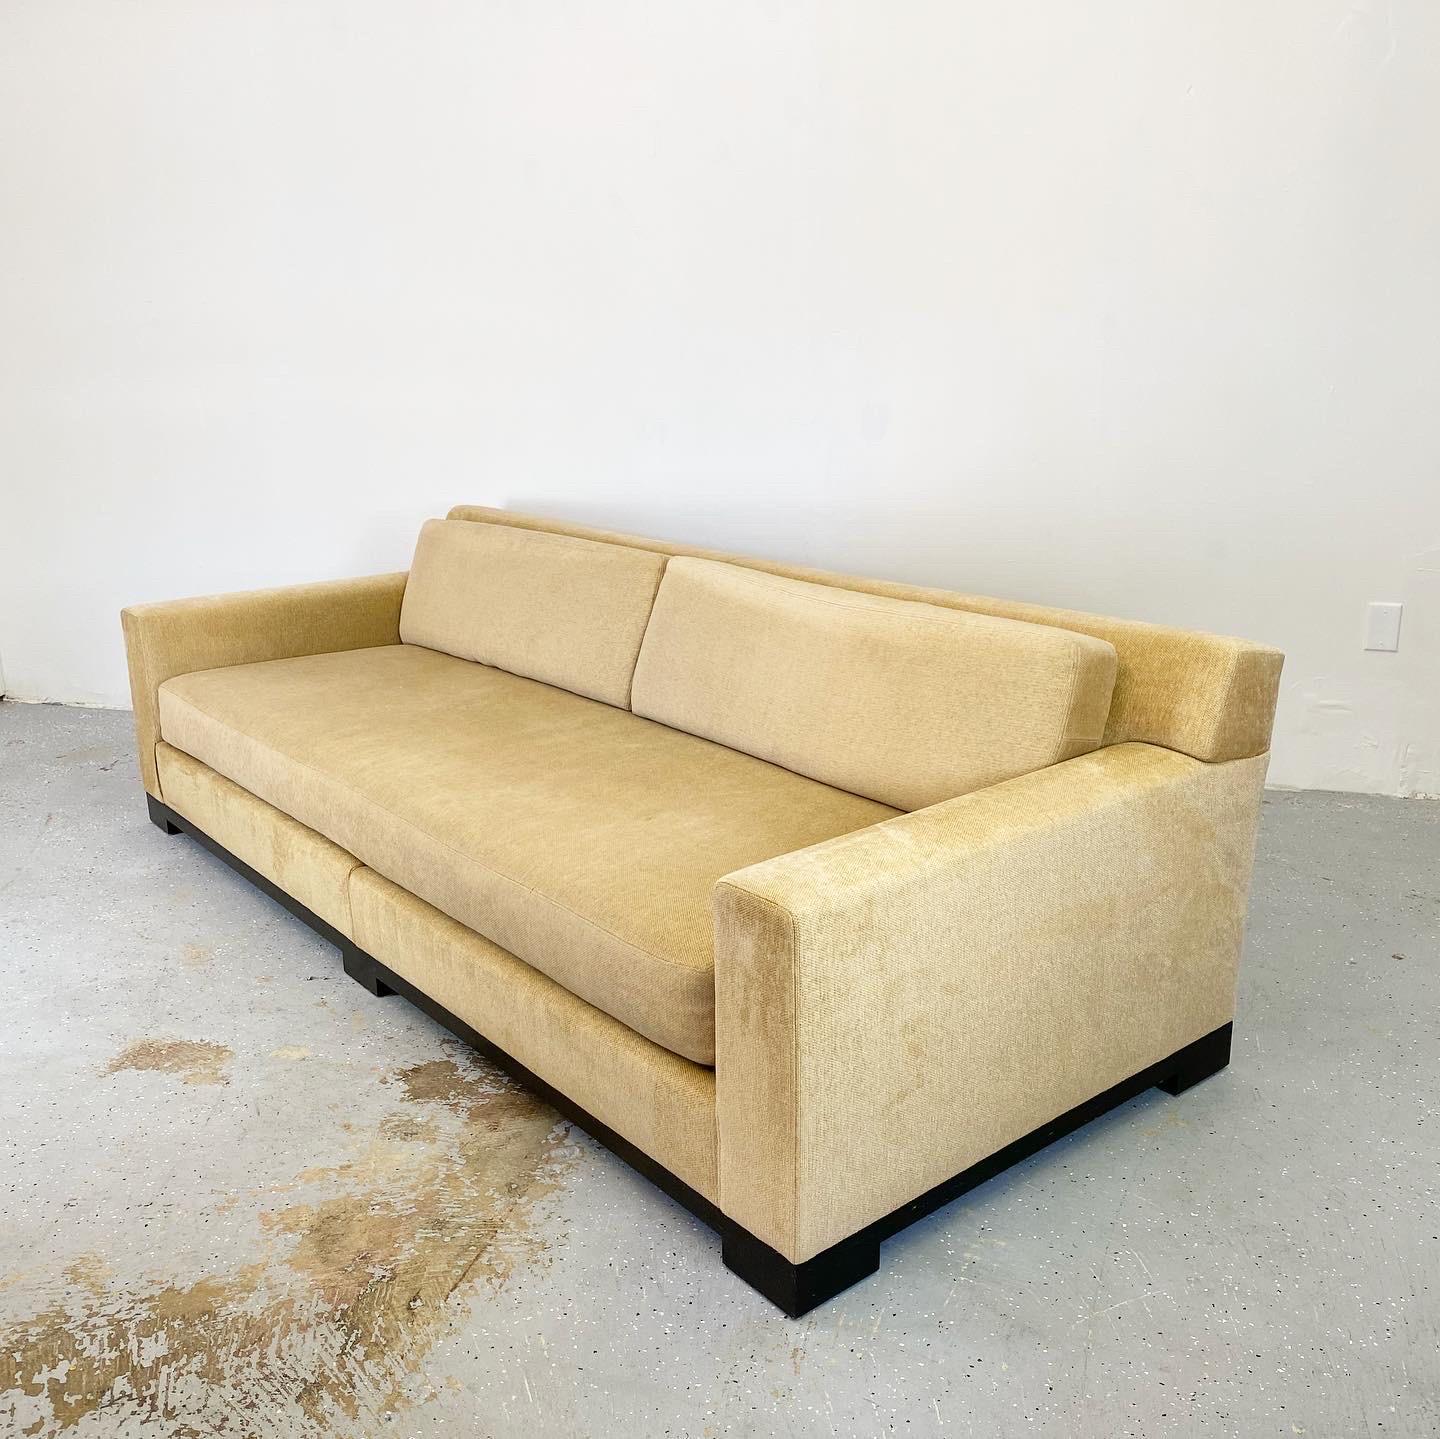 Luxurious pair of sofas by Holly Hunt designed by Christian Liaigre, priced individually. These are each two pieces for ease of install. Beautiful minimal design with thick cushions and deep seat offering plenty of comfort. In need of new upholstery.